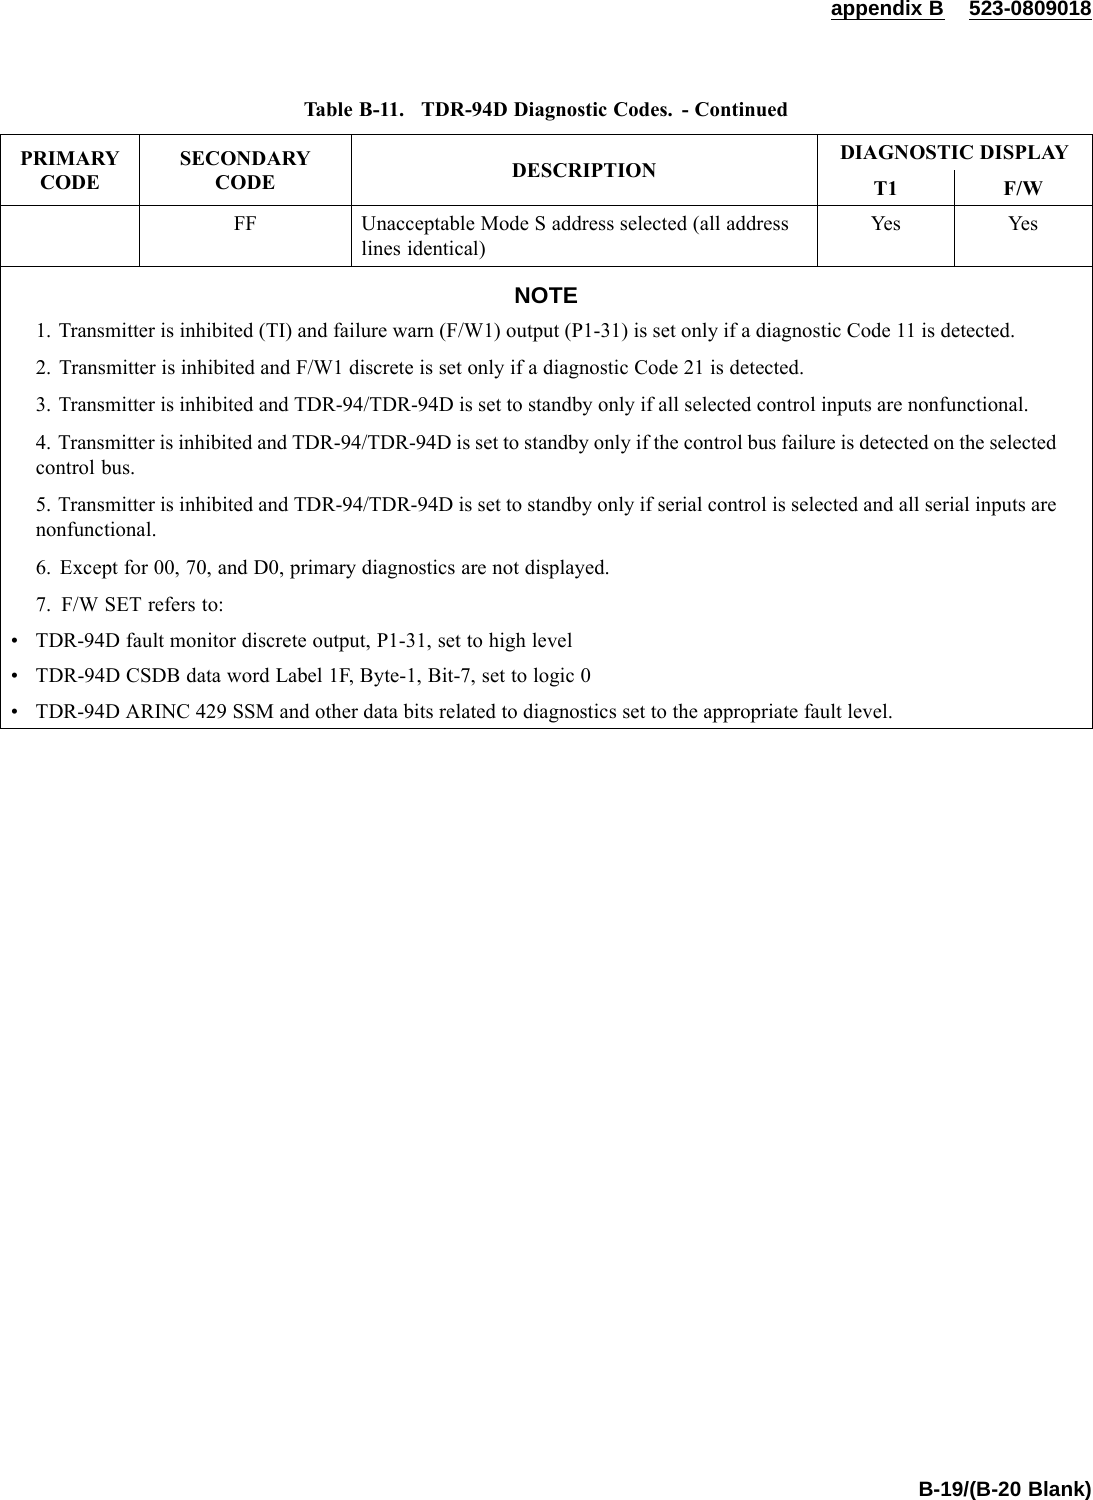 appendix B 523-0809018Table B-11. TDR-94D Diagnostic Codes. - ContinuedDIAGNOSTIC DISPLAYPRIMARYCODESECONDARYCODE DESCRIPTION T1 F/WFF Unacceptable Mode S address selected (all addresslines identical)Yes YesNOTE1. Transmitter is inhibited (TI) and failure warn (F/W1) output (P1-31) is set only if a diagnostic Code 11 is detected.2. Transmitter is inhibited and F/W1 discrete is set only if a diagnostic Code 21 is detected.3. Transmitter is inhibited and TDR-94/TDR-94D is set to standby only if all selected control inputs are nonfunctional.4. Transmitter is inhibited and TDR-94/TDR-94D is set to standby only if the control bus failure is detected on the selectedcontrol bus.5. Transmitter is inhibited and TDR-94/TDR-94D is set to standby only if serial control is selected and all serial inputs arenonfunctional.6. Except for 00, 70, and D0, primary diagnostics are not displayed.7. F/W SET refers to:• TDR-94D fault monitor discrete output, P1-31, set to high level• TDR-94D CSDB data word Label 1F, Byte-1, Bit-7, set to logic 0• TDR-94D ARINC 429 SSM and other data bits related to diagnostics set to the appropriate fault level.B-19/(B-20 Blank)